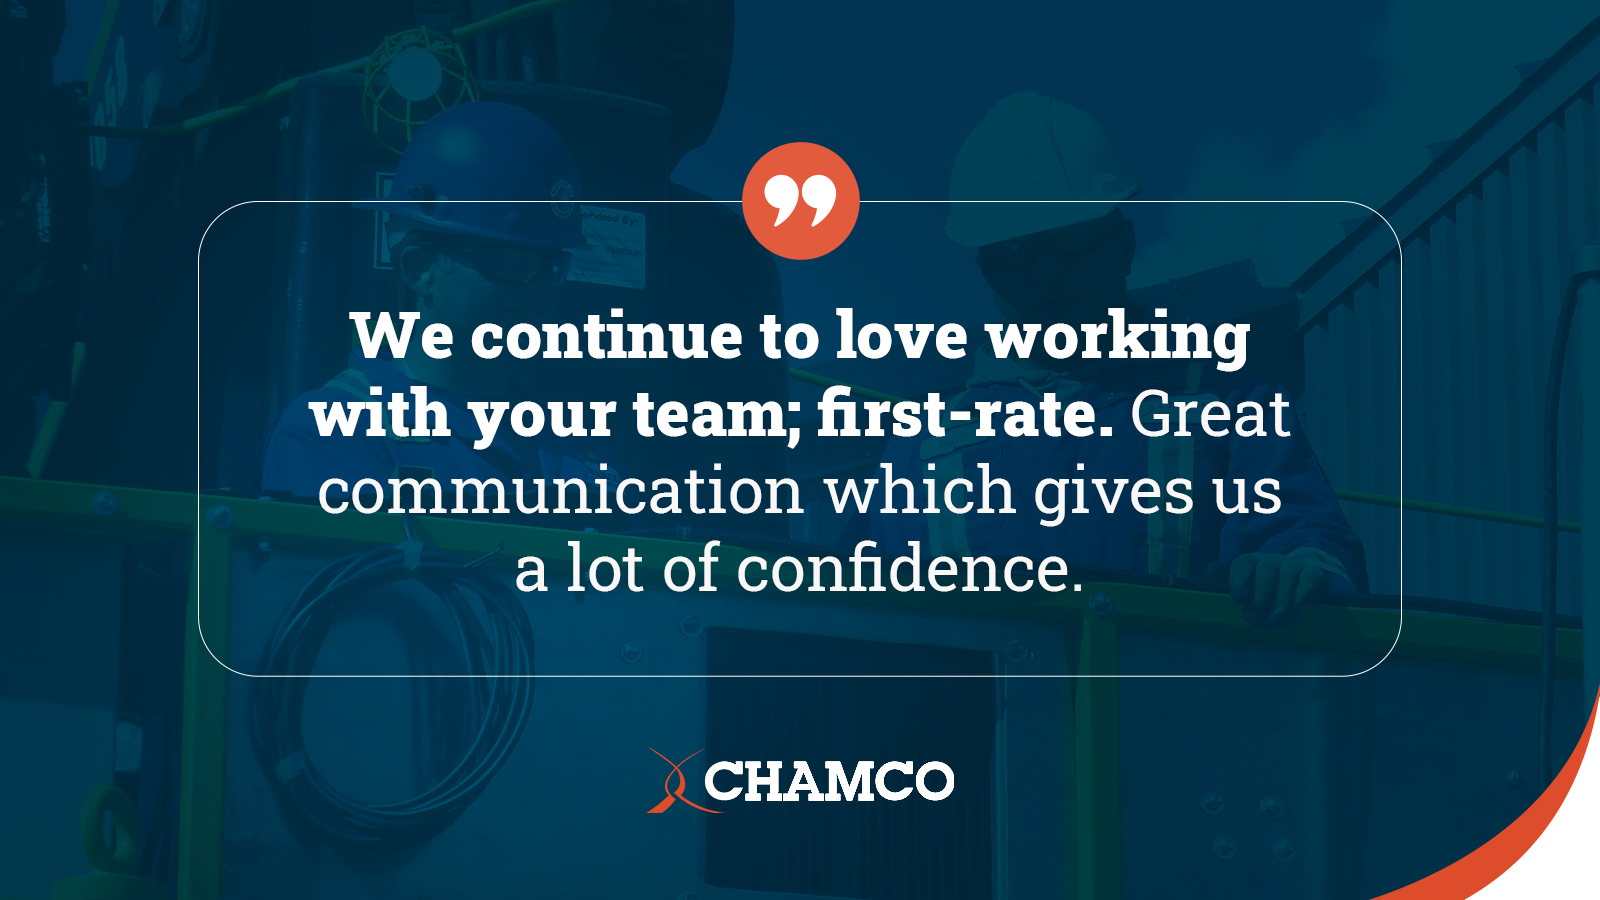 "We continue to love working with your team;first-rate. Great communication which gives us a lot of confidence"